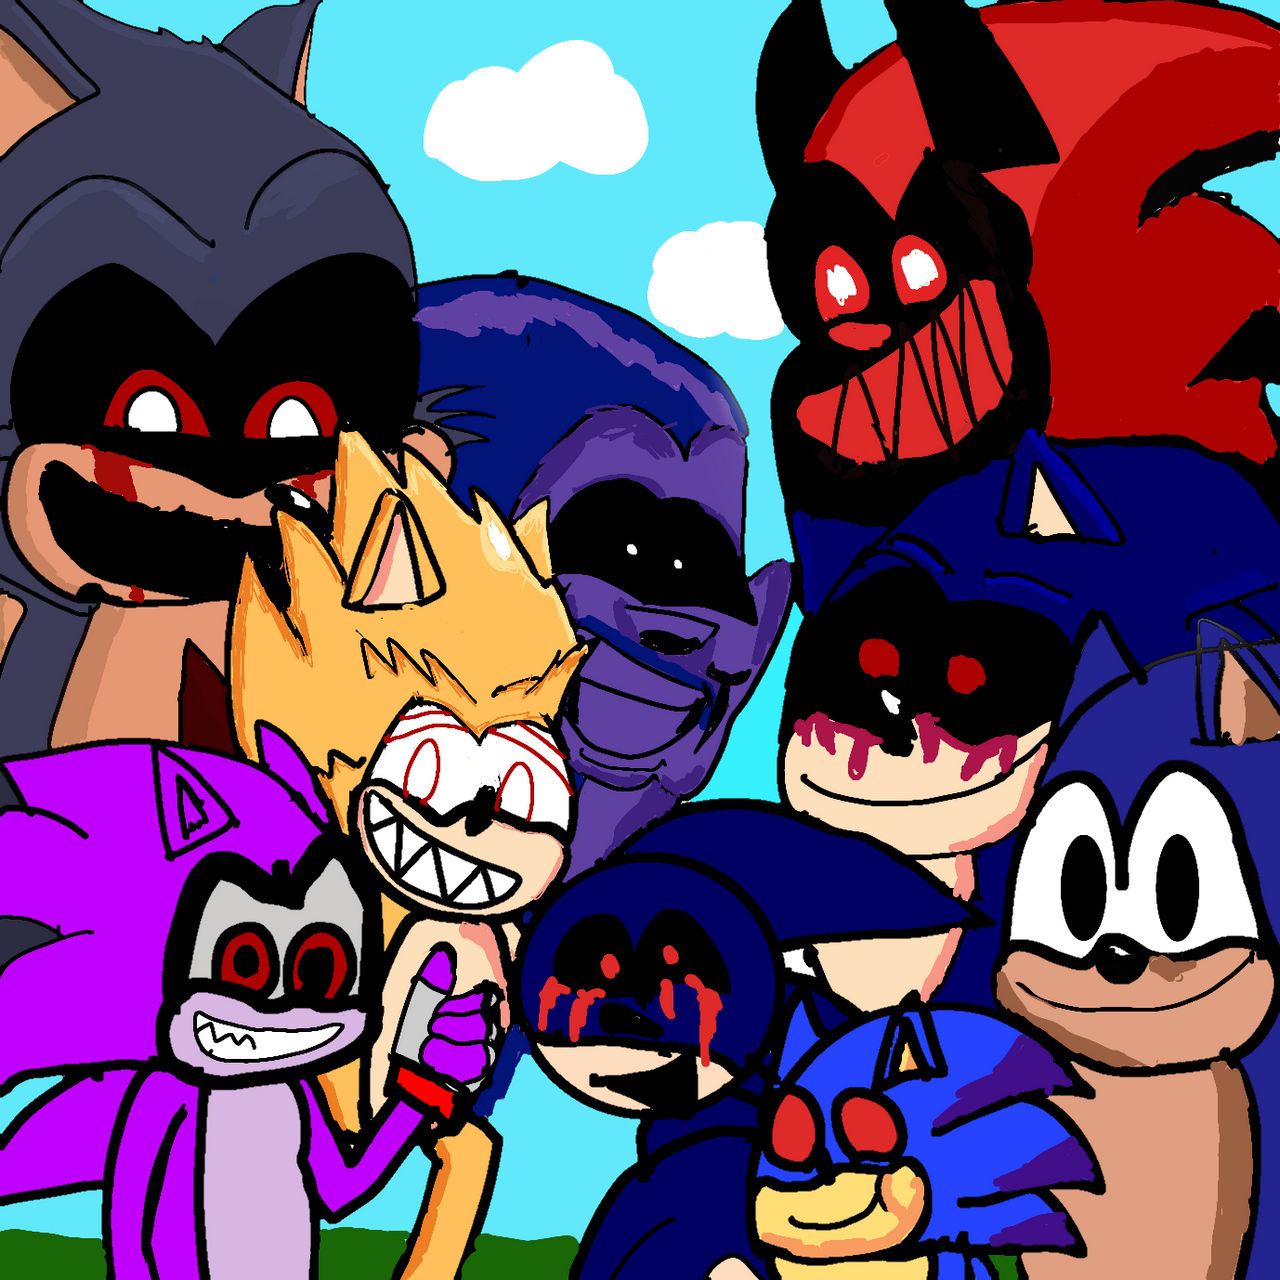 sonic.exe, lord x, faker sonic, majin and fleetway by AlyCatToons on  DeviantArt